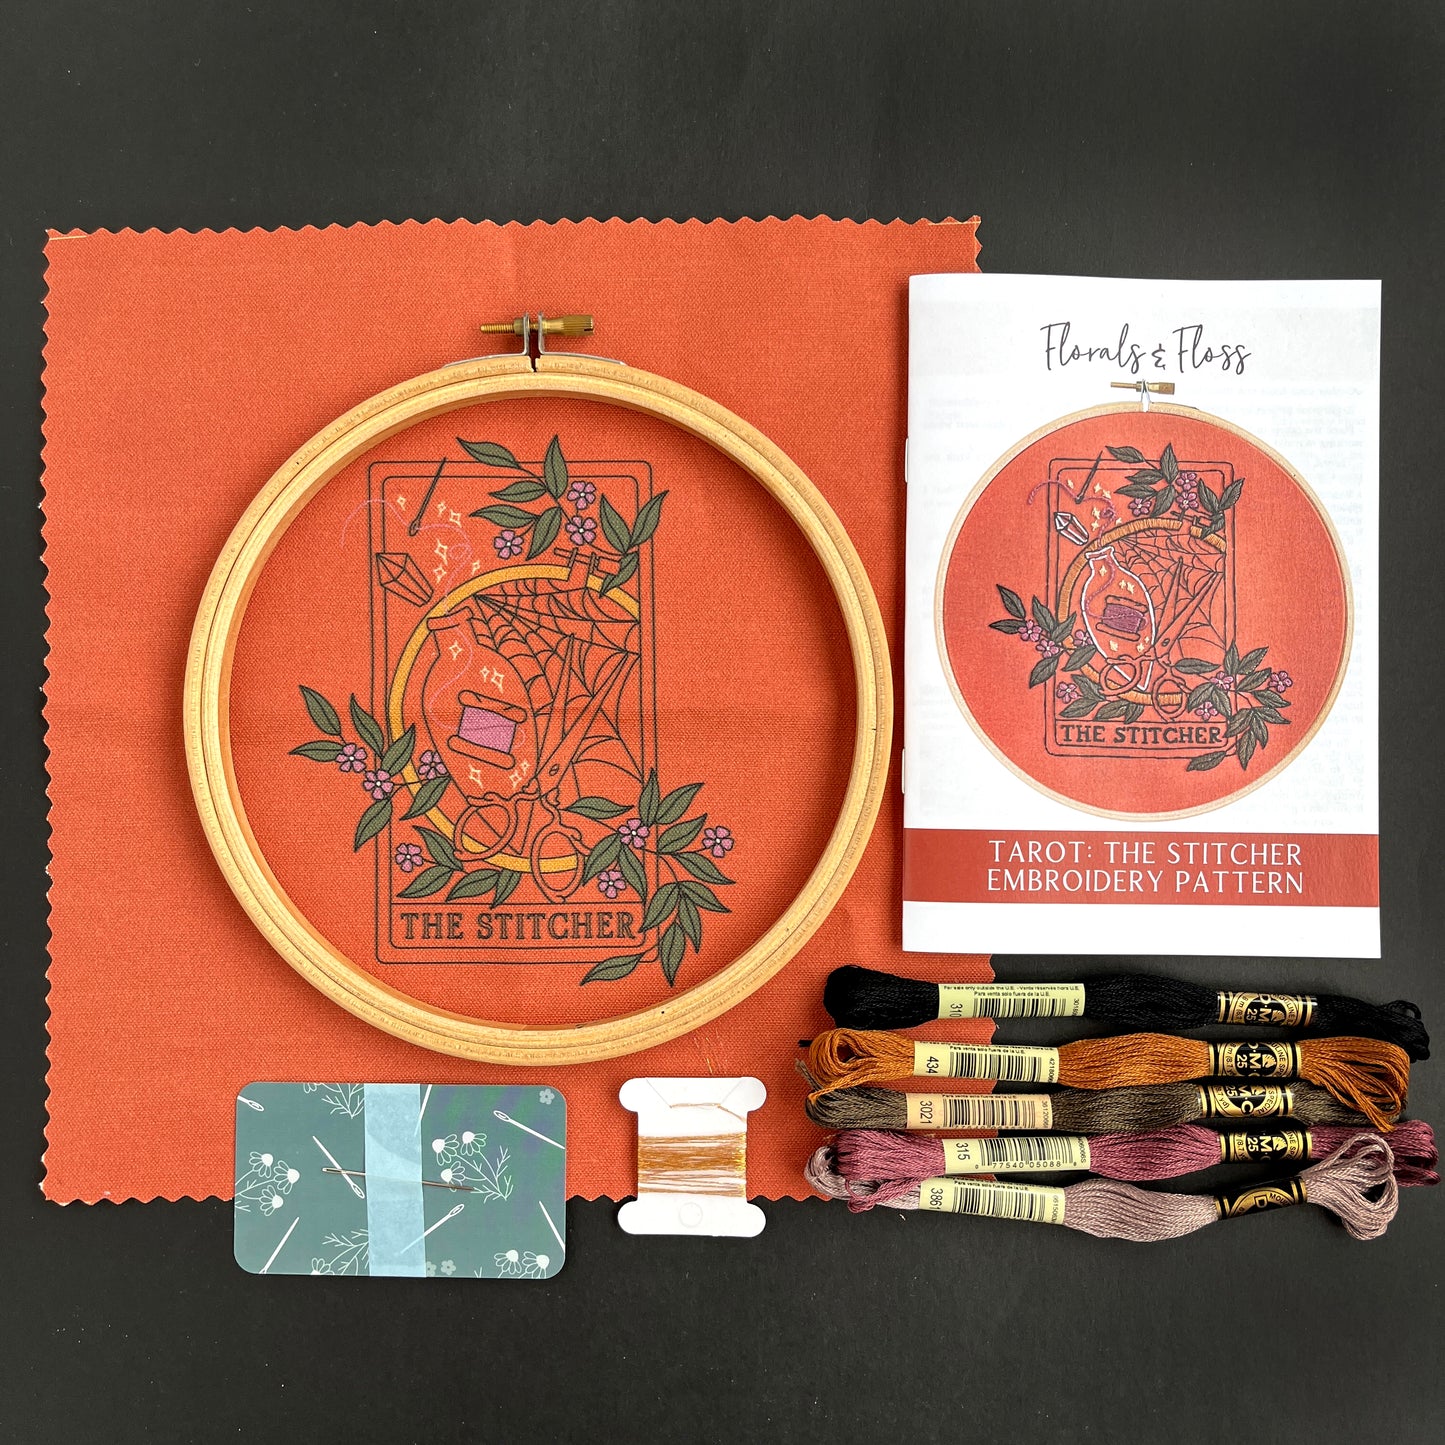 The Stitcher Embroidery Kit (printed fabric) - 7"